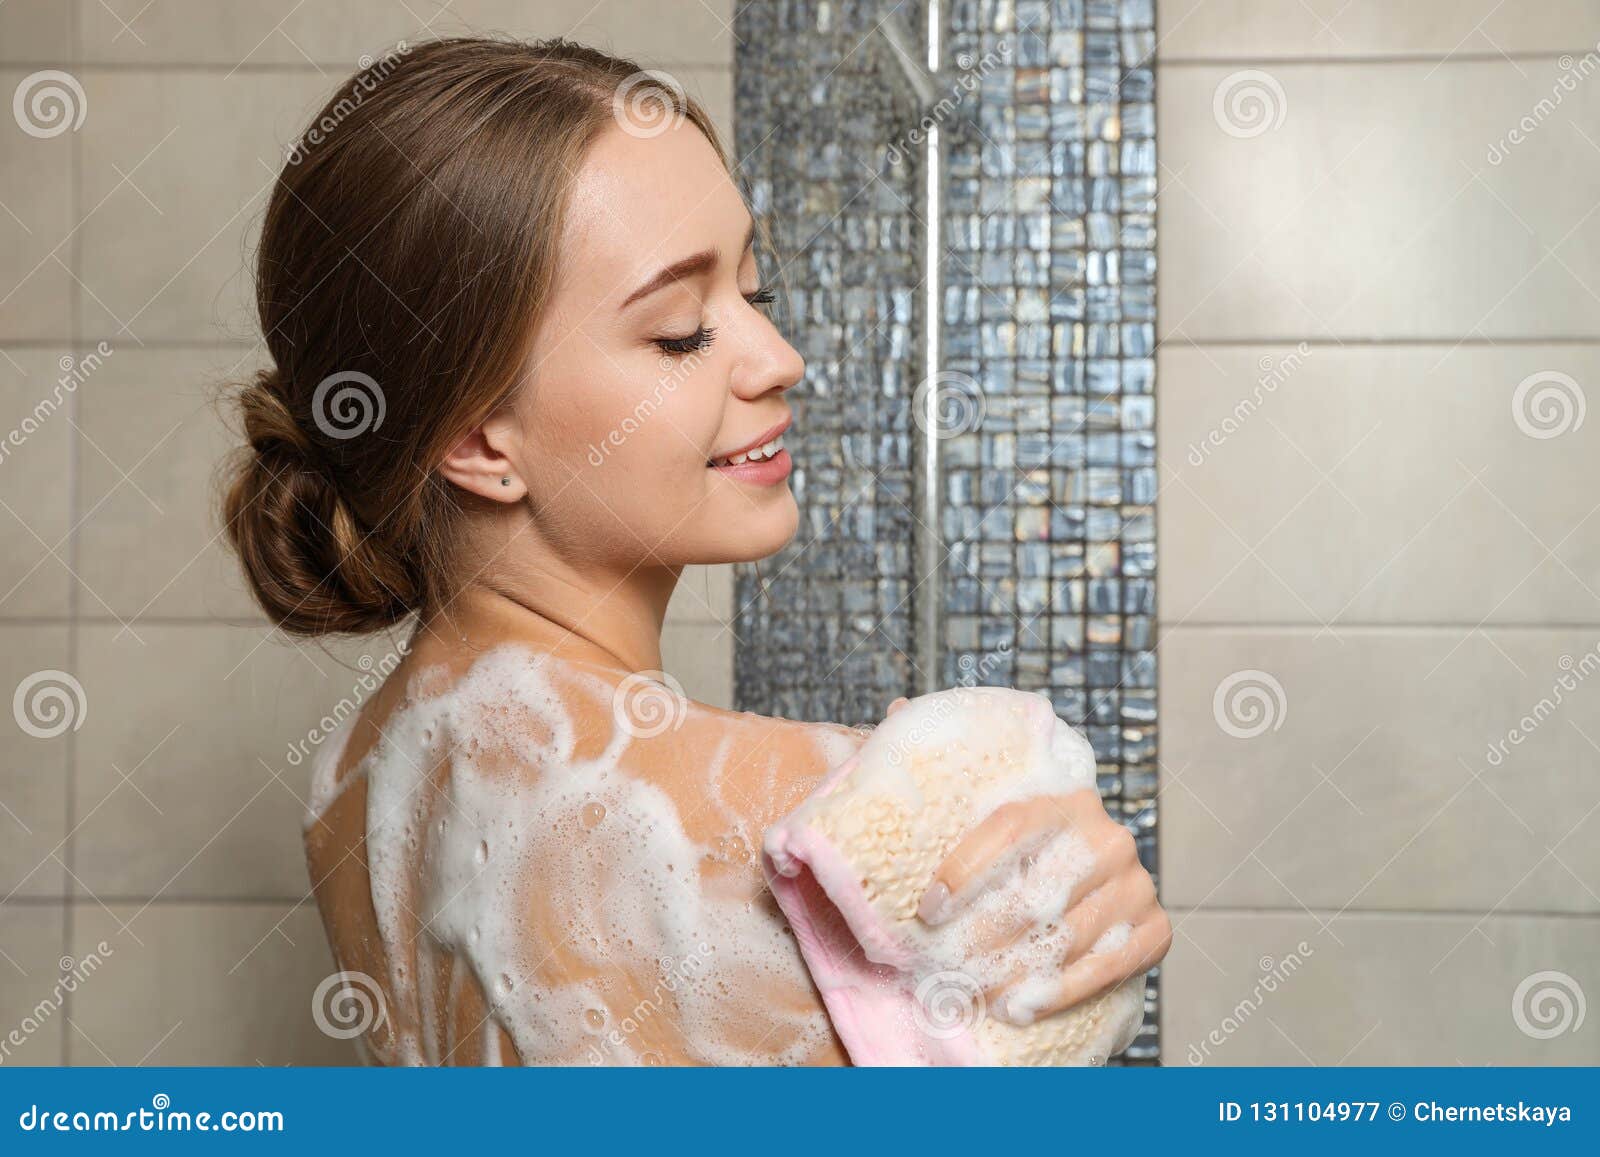 young-woman-covered-soap-foam-taking-shower-young-woman-covered-soap-foam-taking-shower-bathroom-131104977.jpg